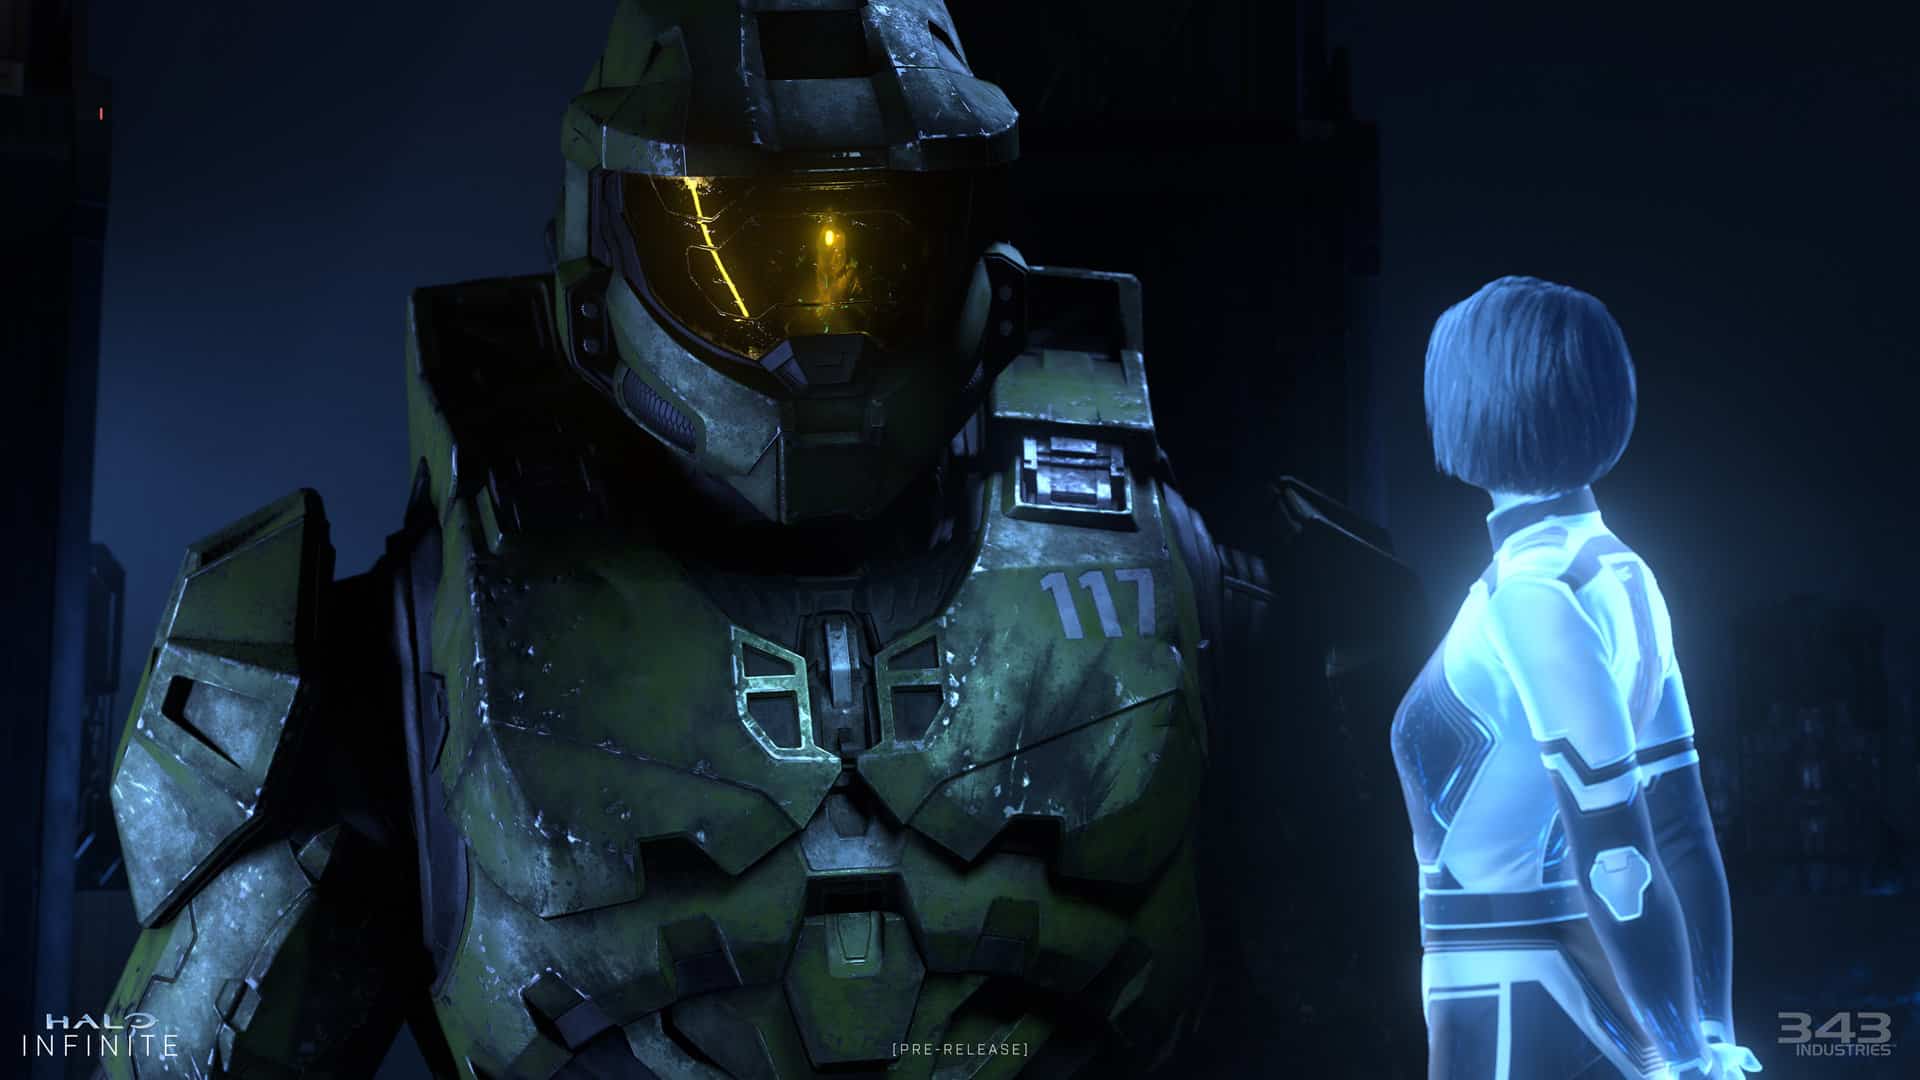 Halo Infinite offers fresh look at campaign gameplay in new video